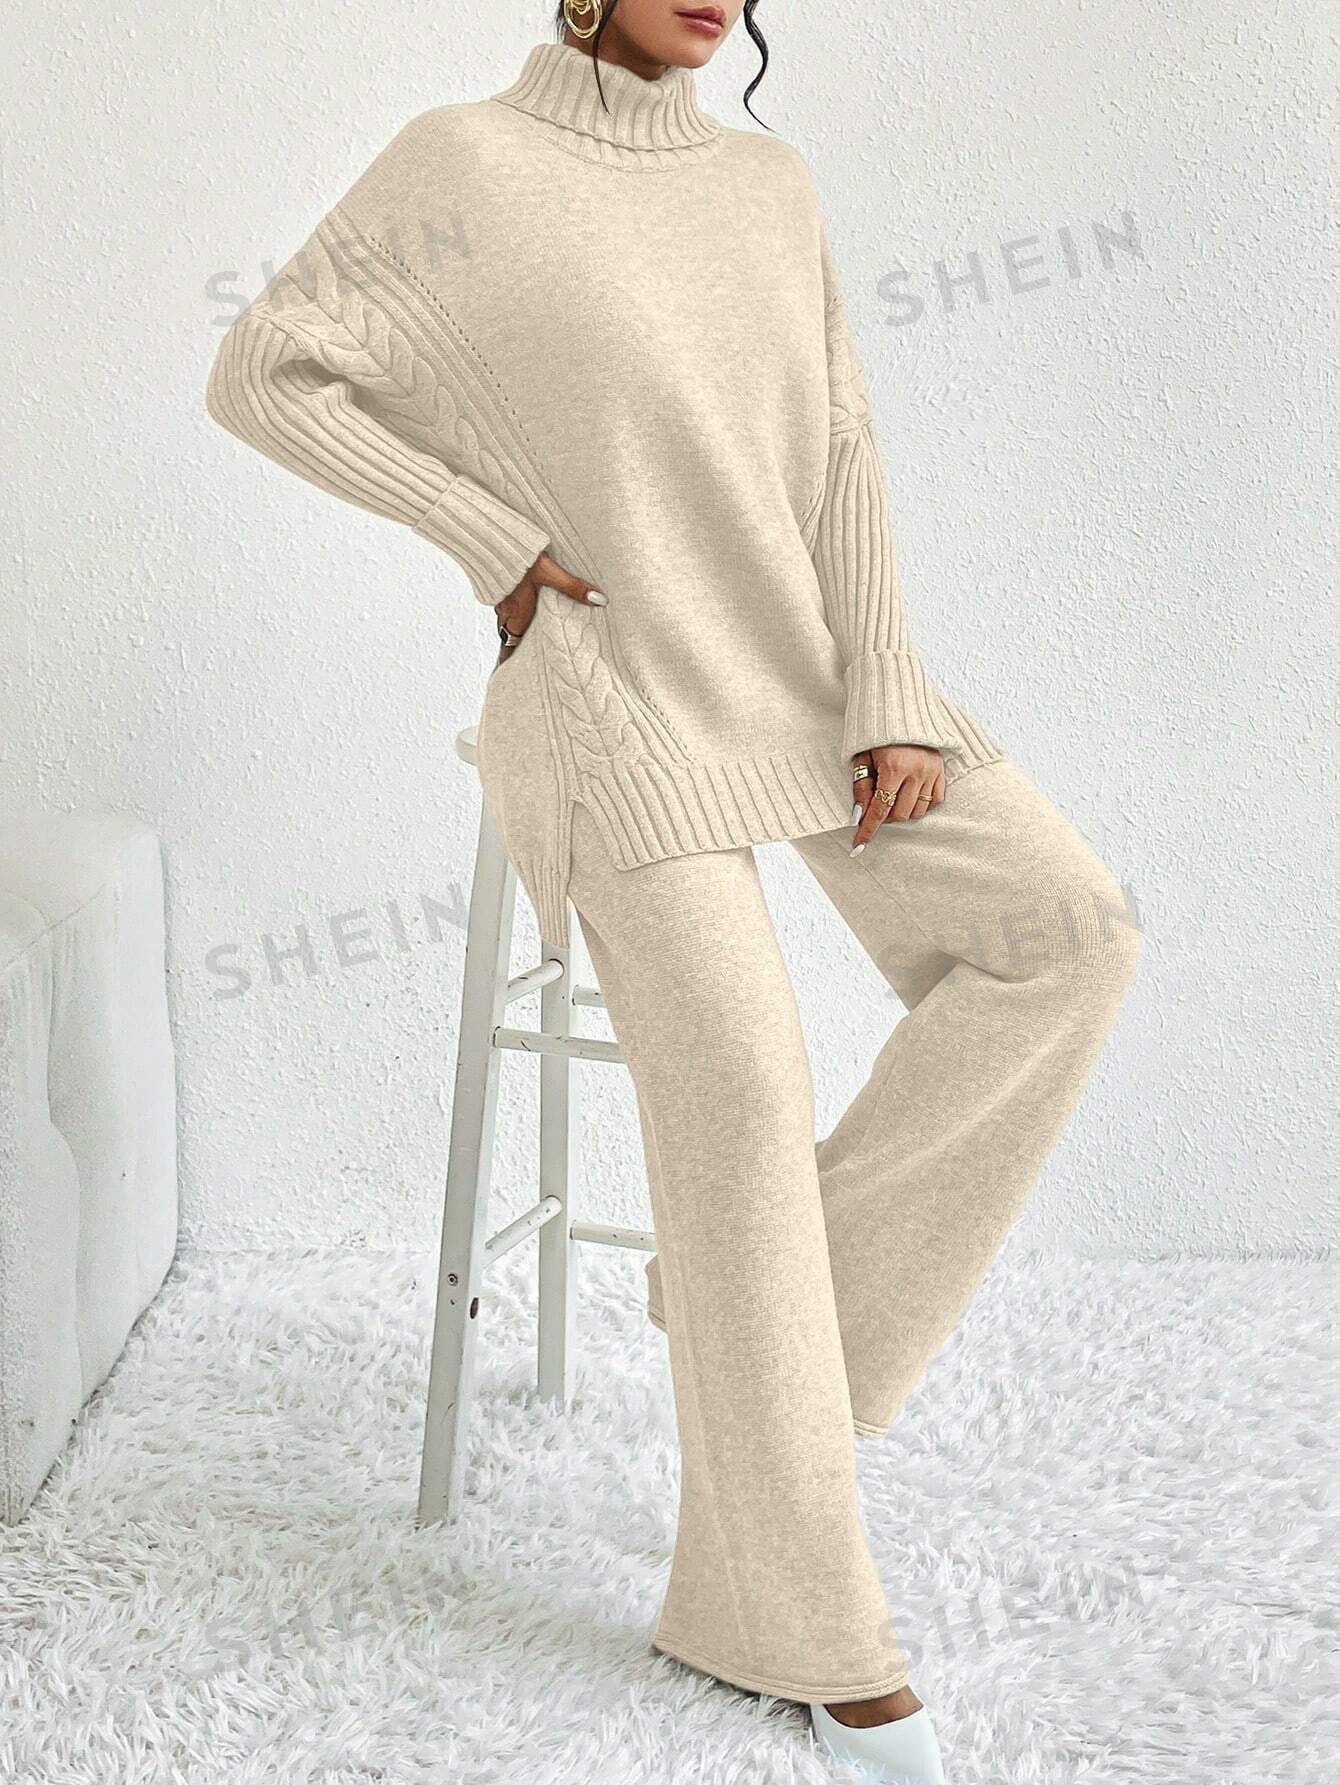 SHEIN Privé High-necked Drop Shoulder Sleeve Sweater And Knitted Pants 2pcs/set | SHEIN